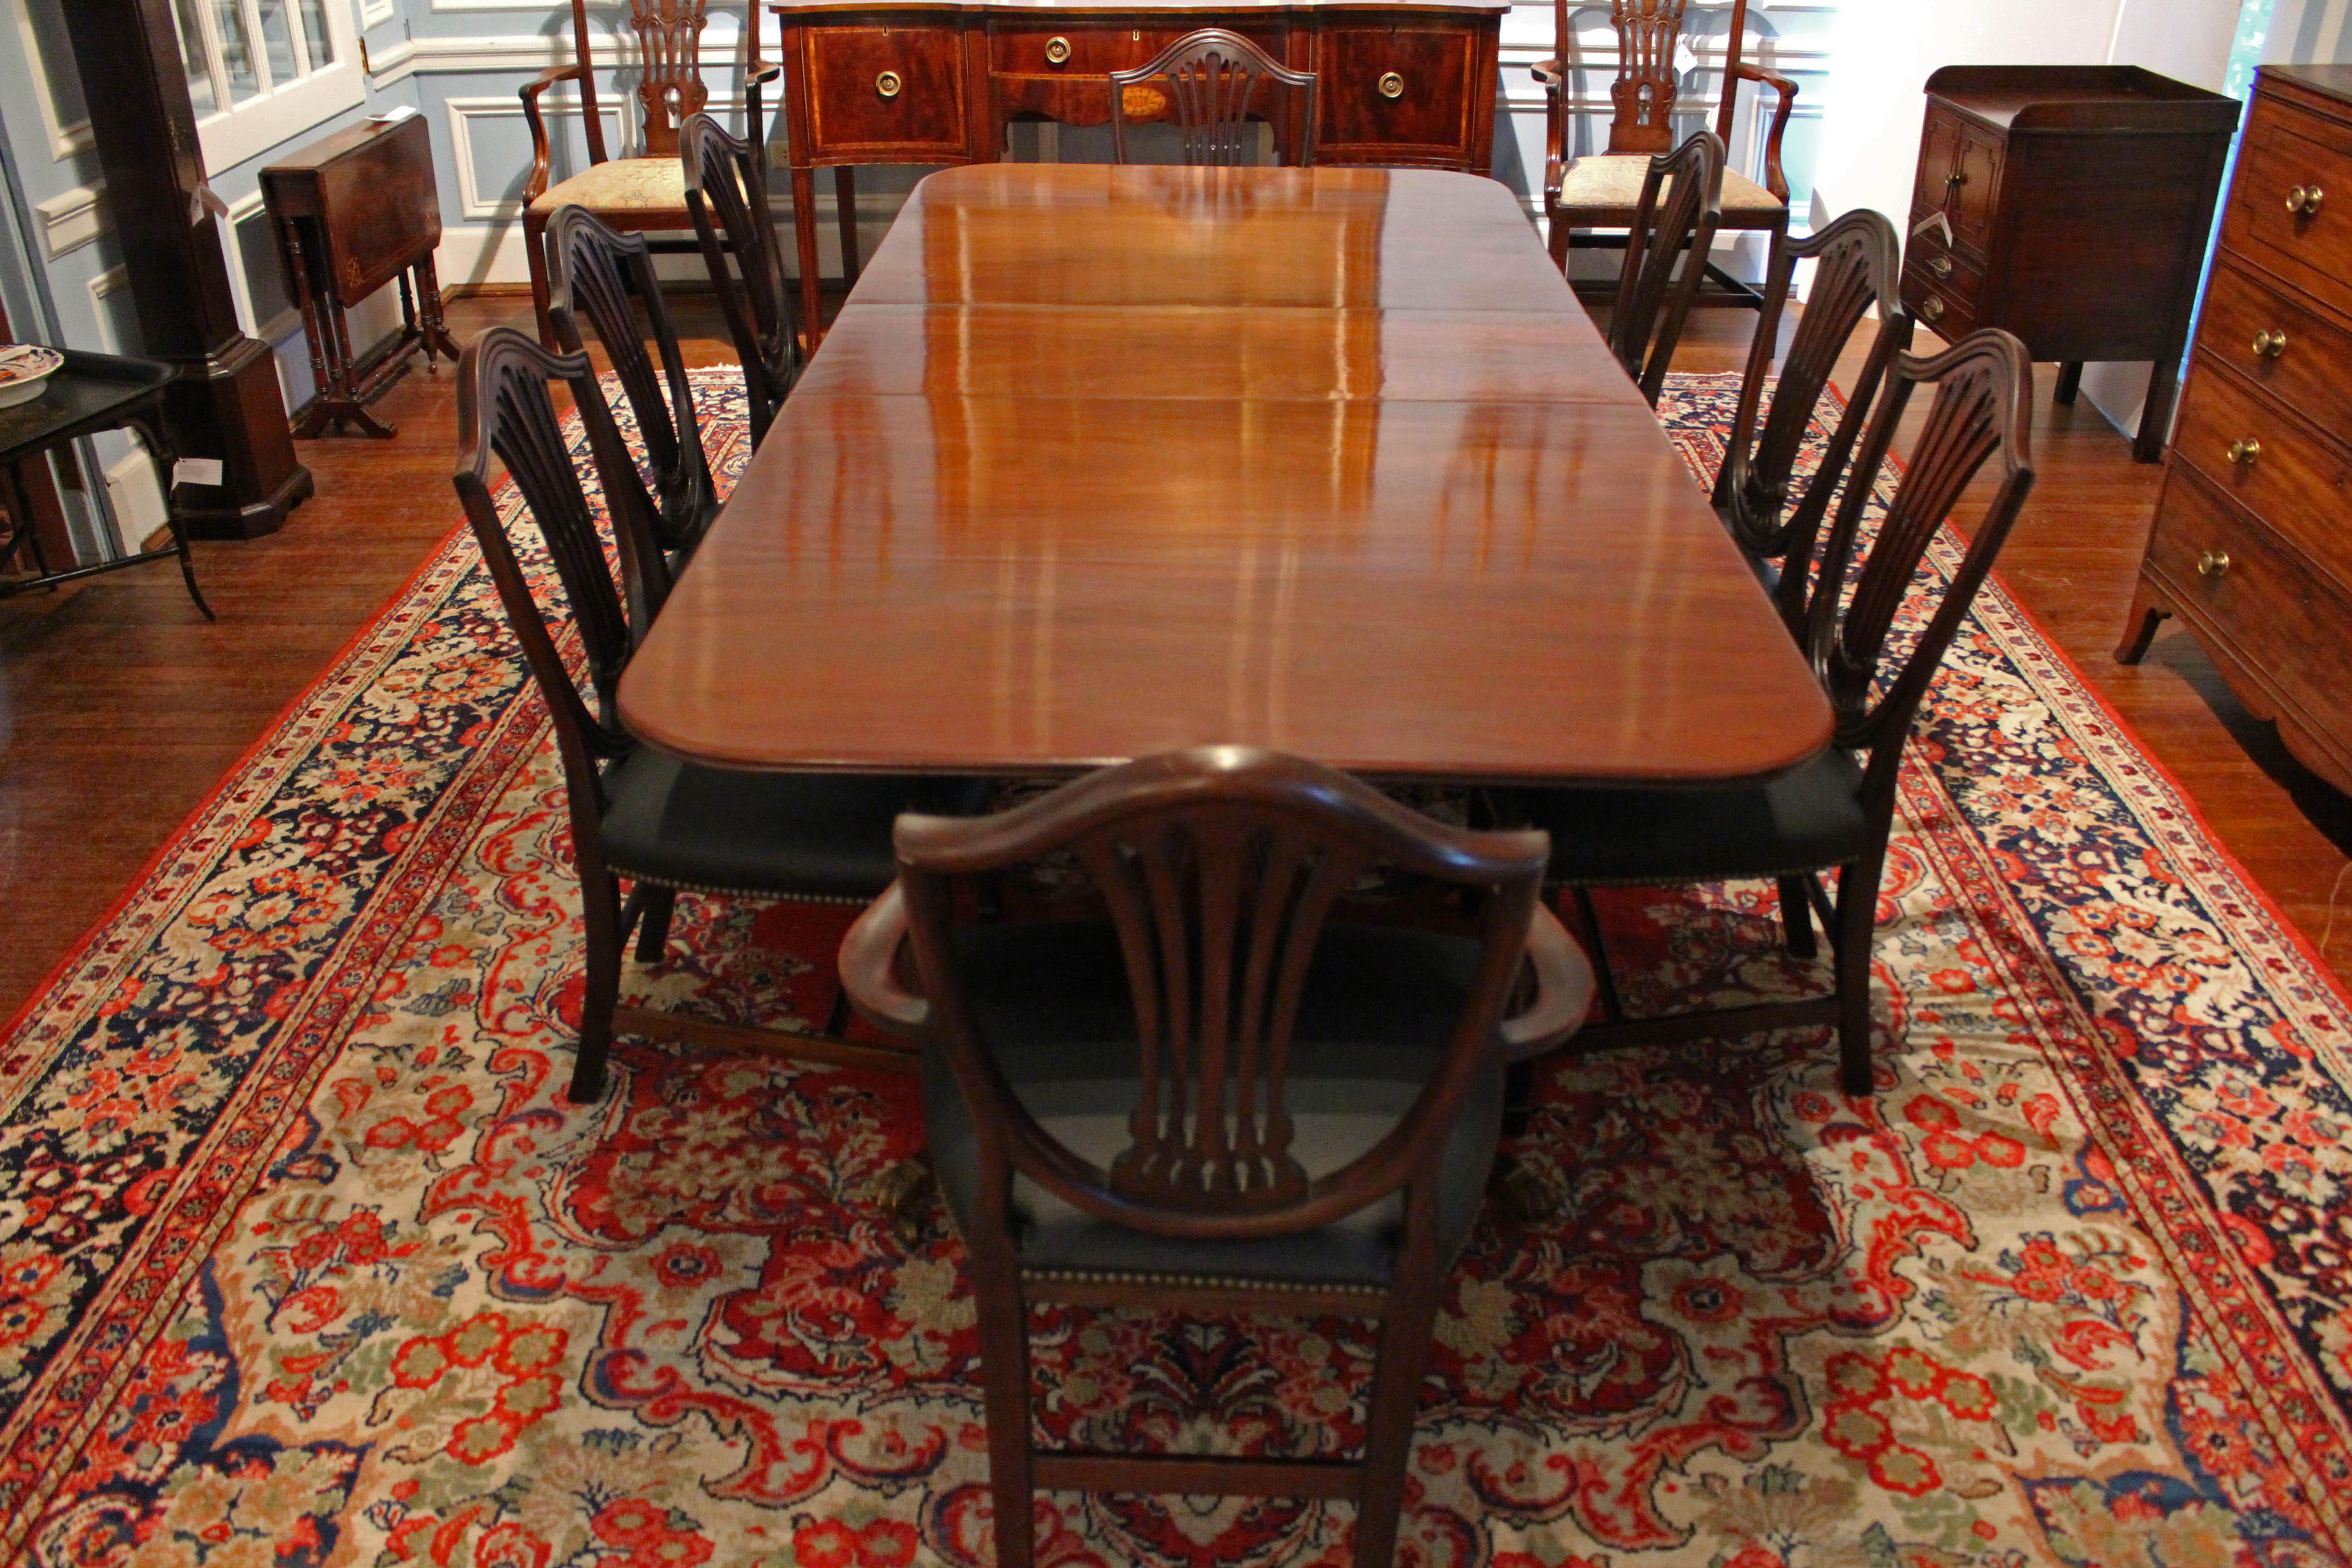 Early 20th century English George III style double pedestal extending dining table with one leaf. Each pedestal with 4 outswept, reeded legs ending in lion paw brass caps & casters. 
29